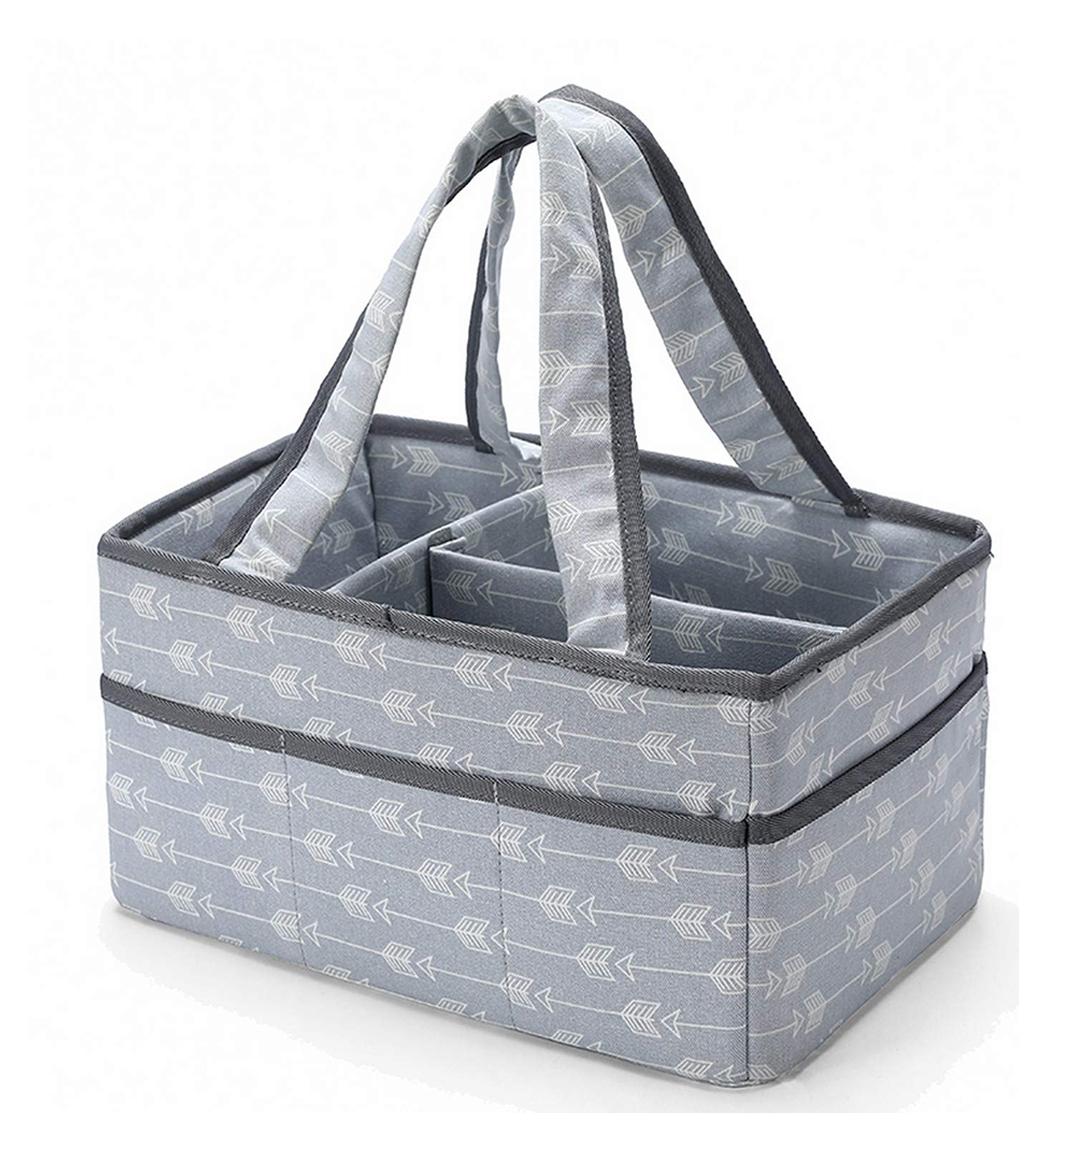 Baby Diaper Caddy Organizer Large Wipes Baby Shower Gift Baskets Blue Girl or Newborn Felt Diaper Caddy for Boy Portable Car Travel Bag Storage Bin for Diapers Toys or Books etc. 